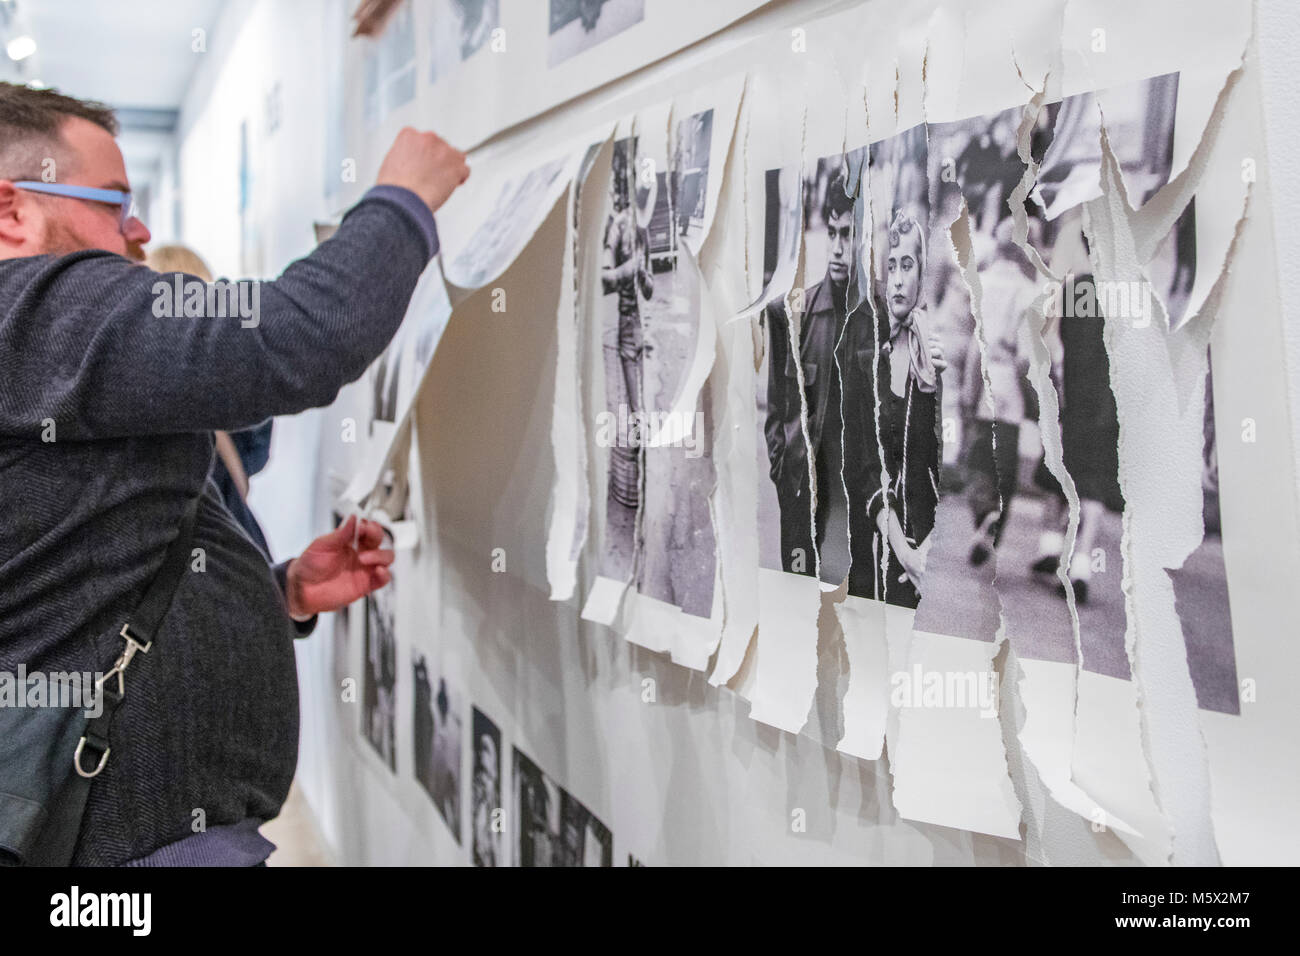 Portland, Oregon, USA. 26 FEB, 2018. The photographer Robert Frank's work from his ground breaking book 'The Americans' hangs  defaced as a gallery goer shreds it at Blue Sky Gallery in Portland, Oregon, USA. The work was destroyed in a “Destruction Dance” performance defacing the photographs with ink and mutilation with scissors, knives and even ice skates  at the end of it’s run. The destruction was Frank's protest regarding today's greed in the global art market. Credit: Ken Hawkins/Alamy Live News Stock Photo